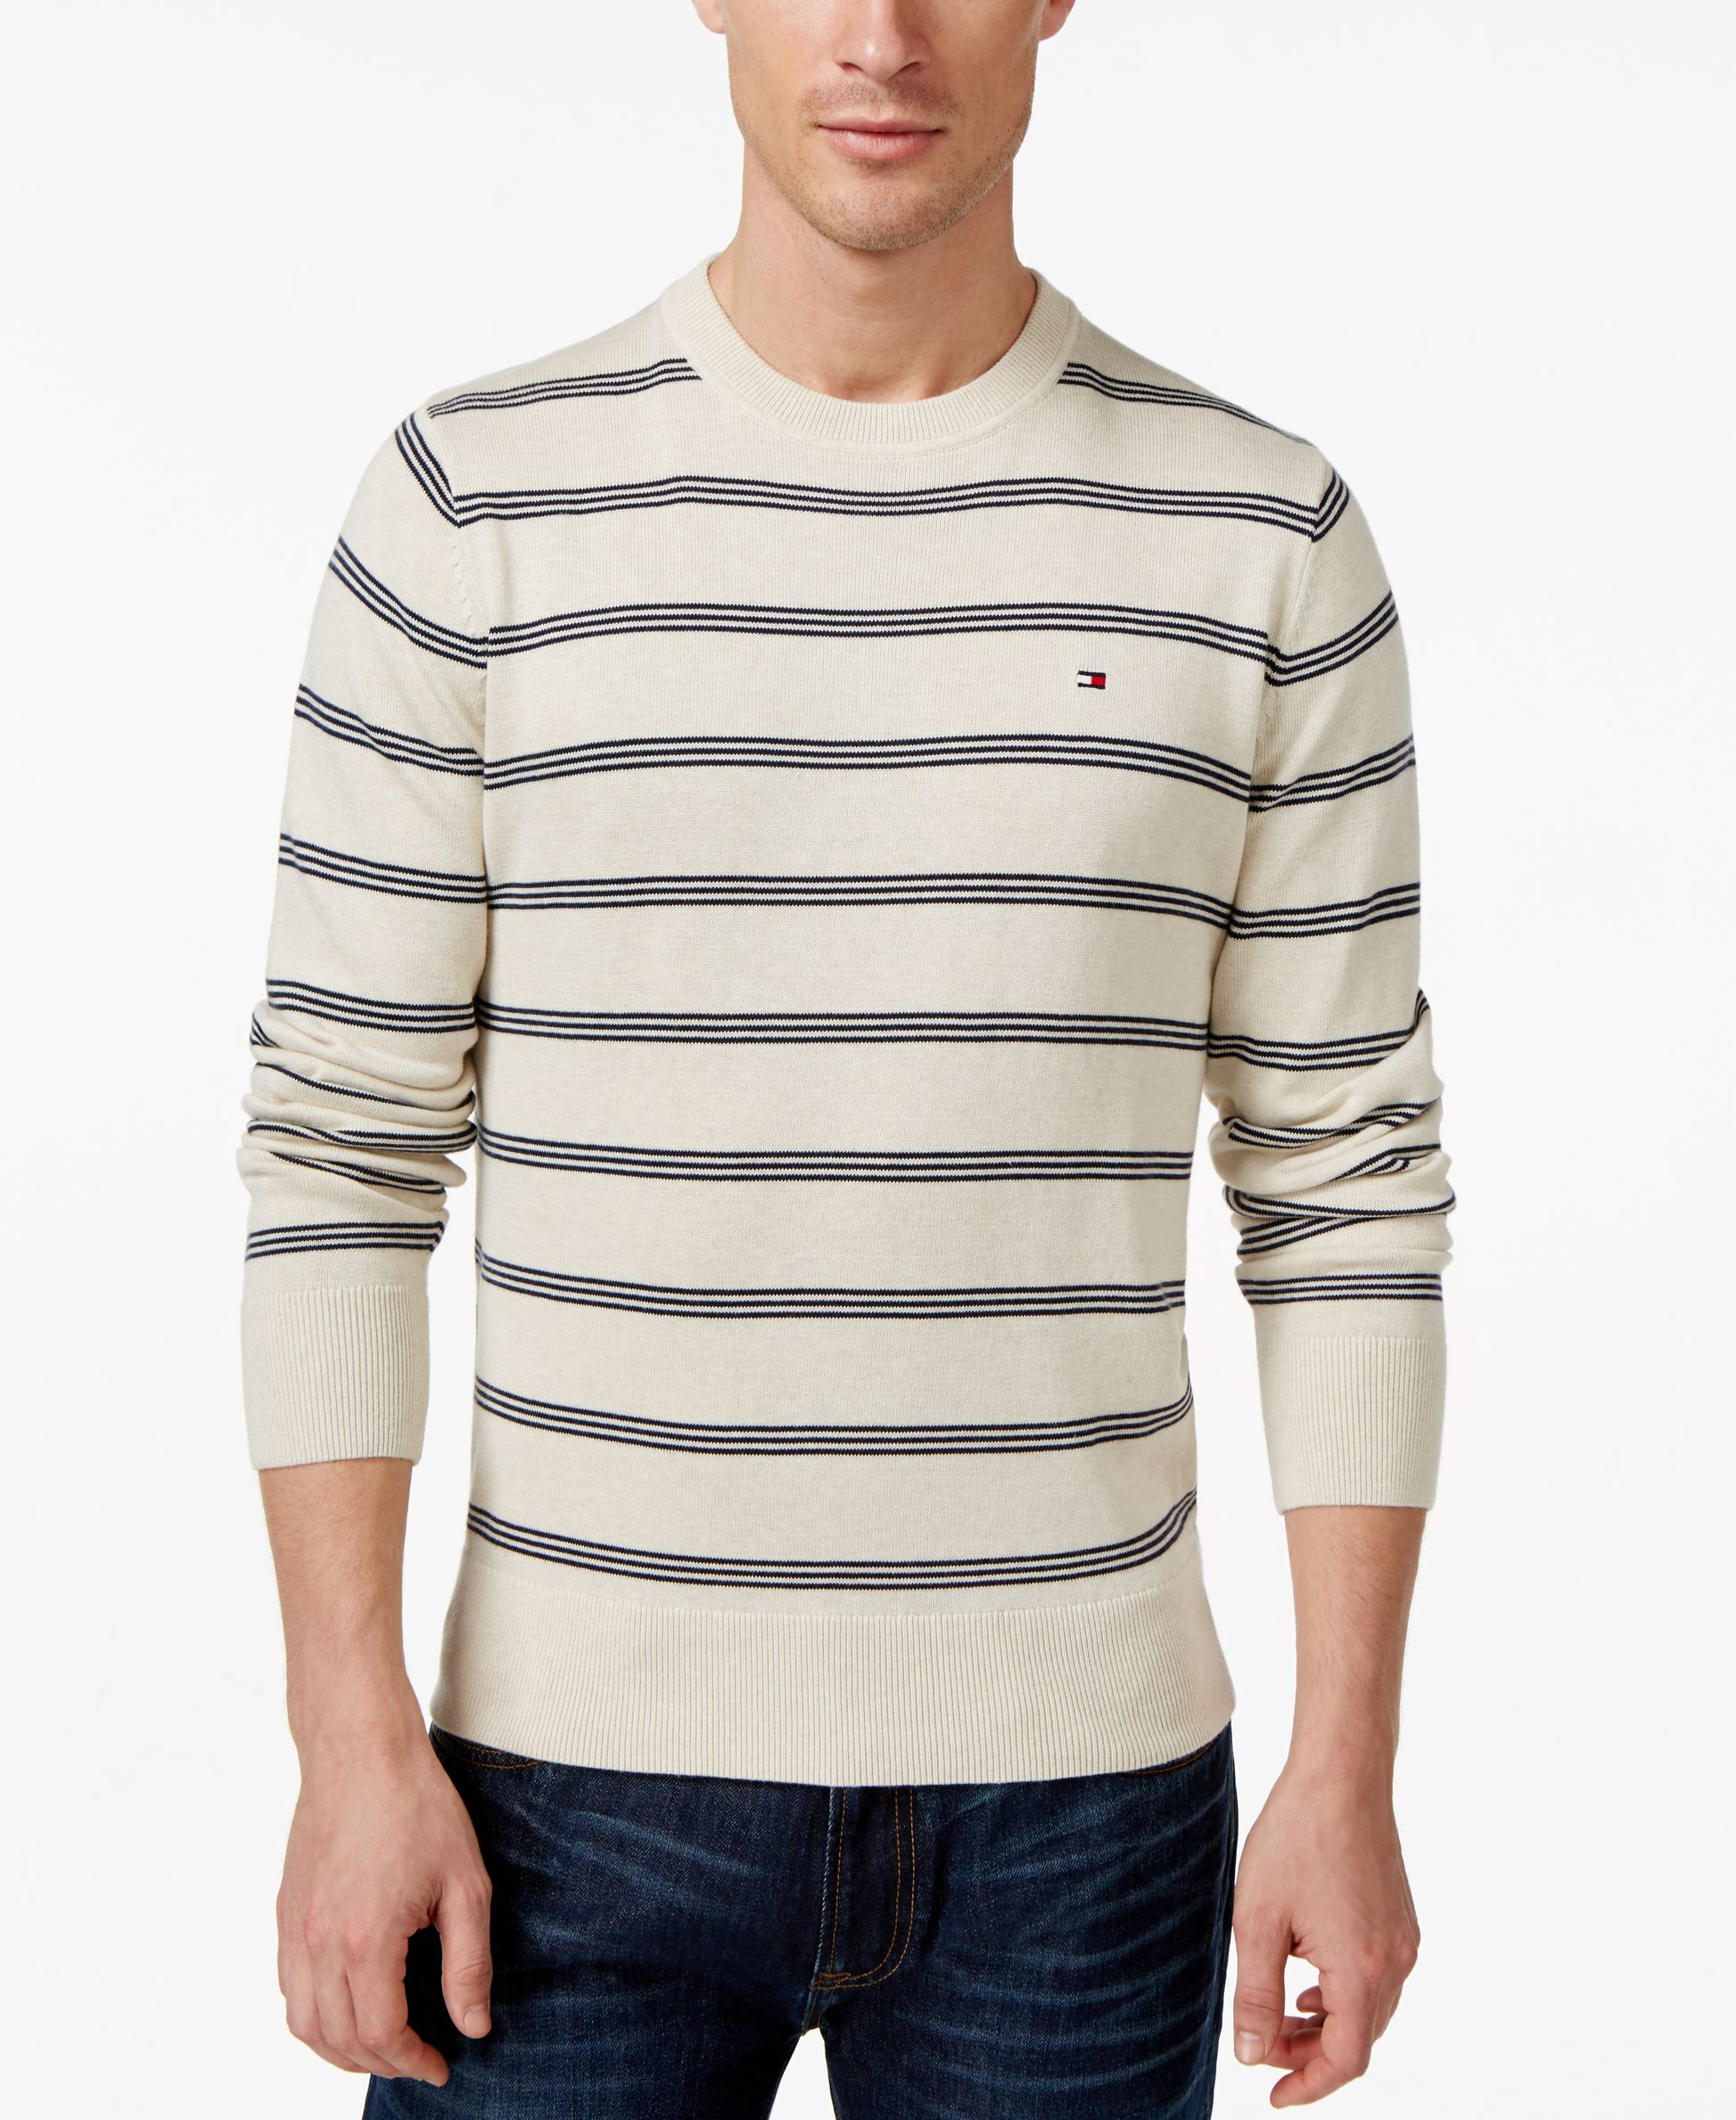 Lyst - Tommy Hilfiger Men's Signature Crew-neck Striped Sweater in ...